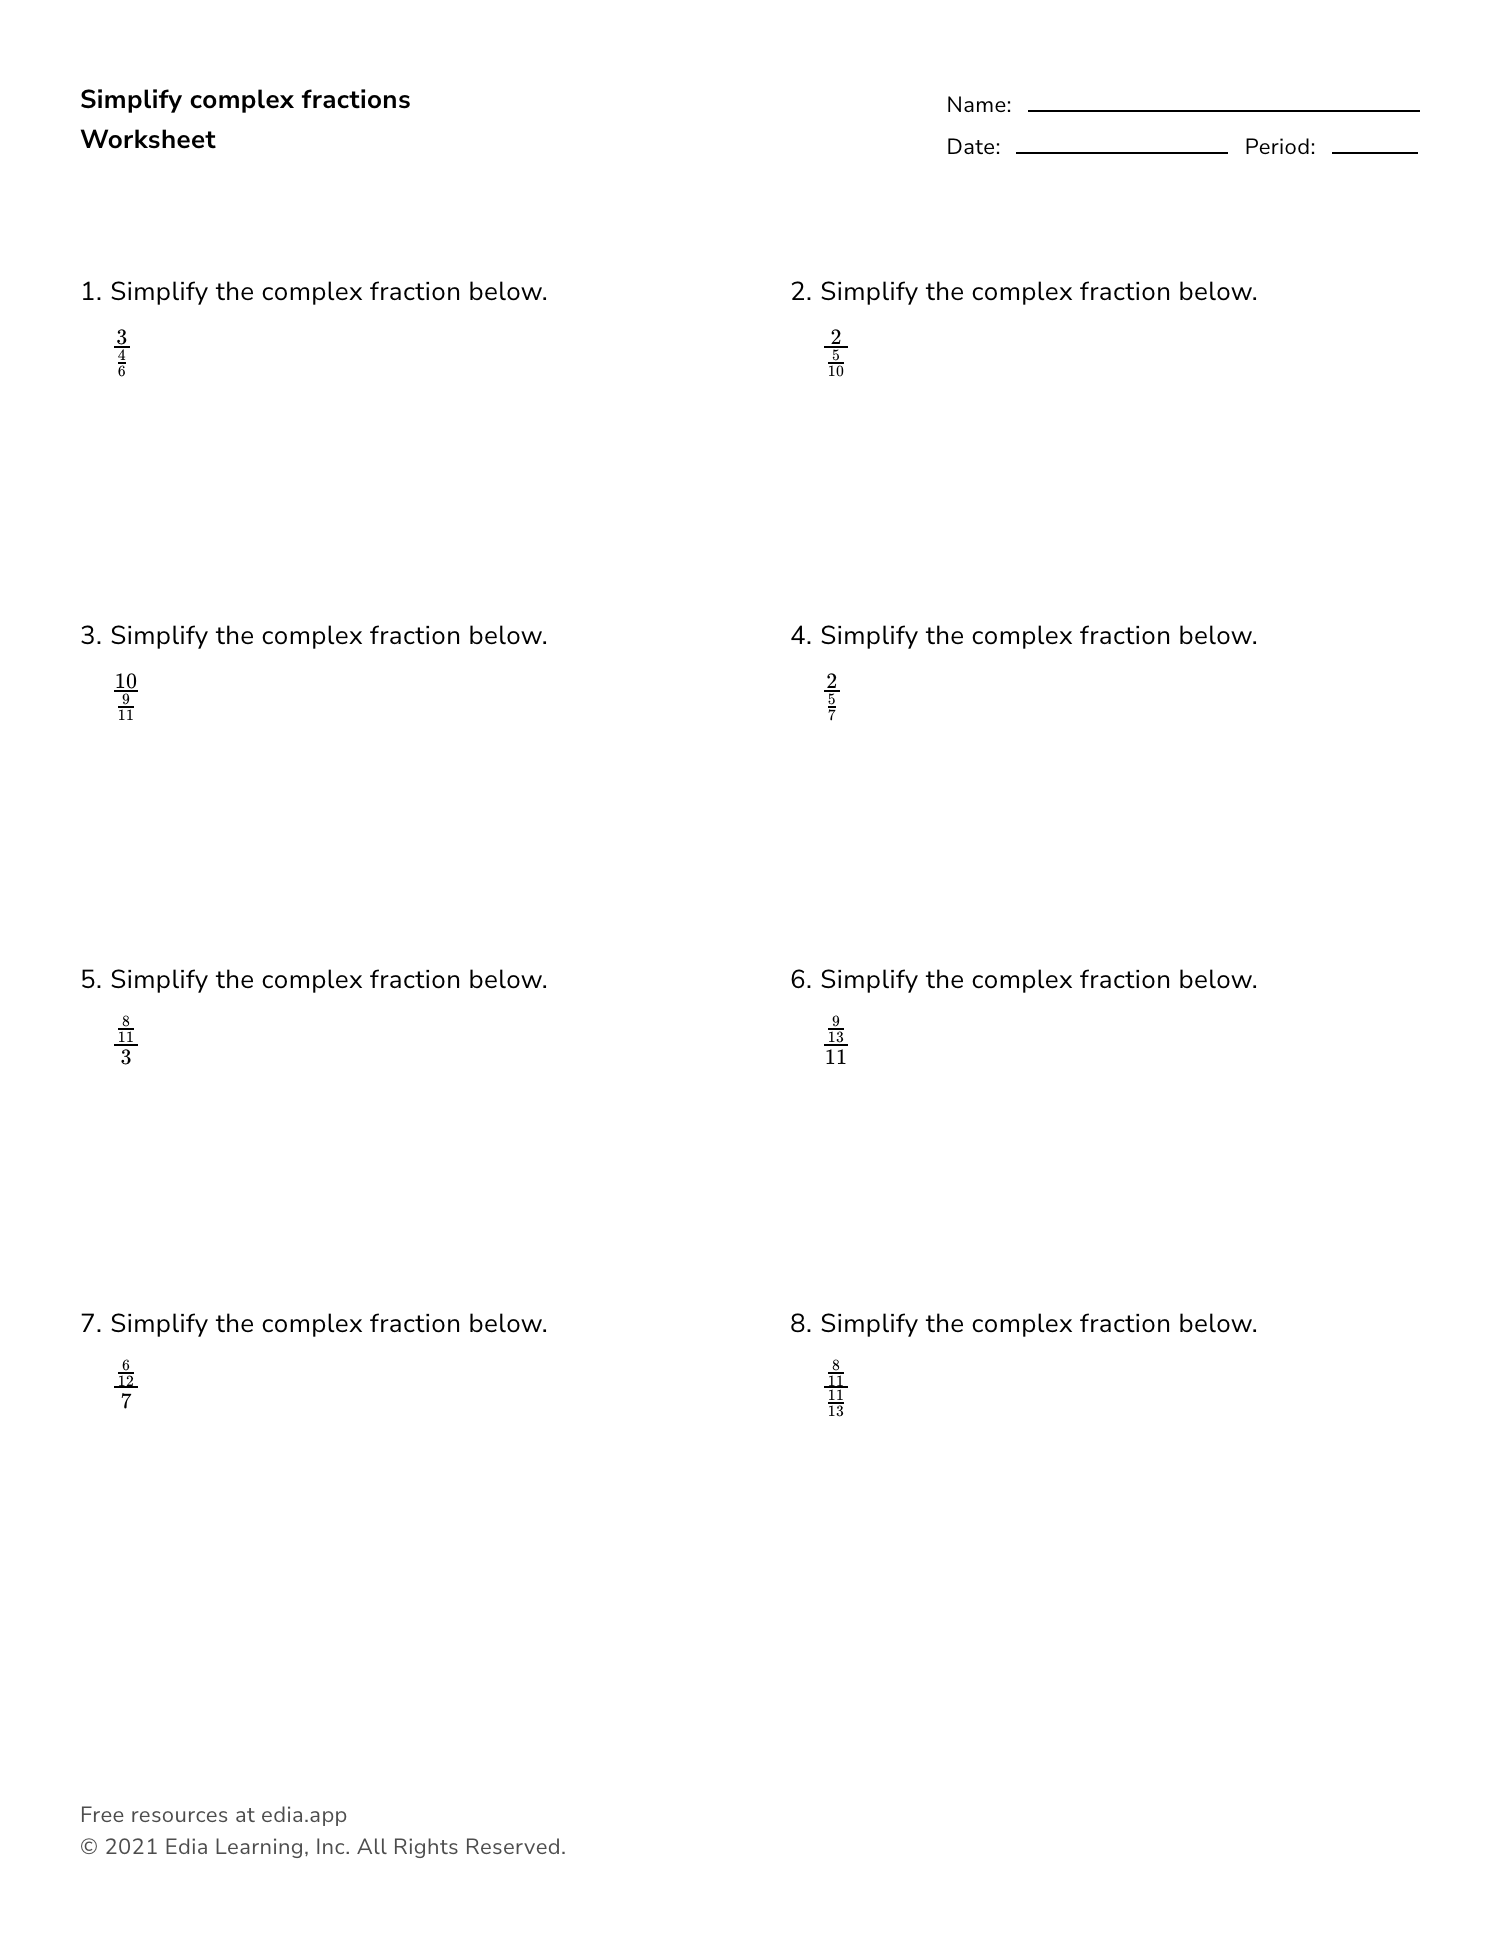 Simplify Complex Fractions - Worksheet Within Simplifying Complex Fractions Worksheet